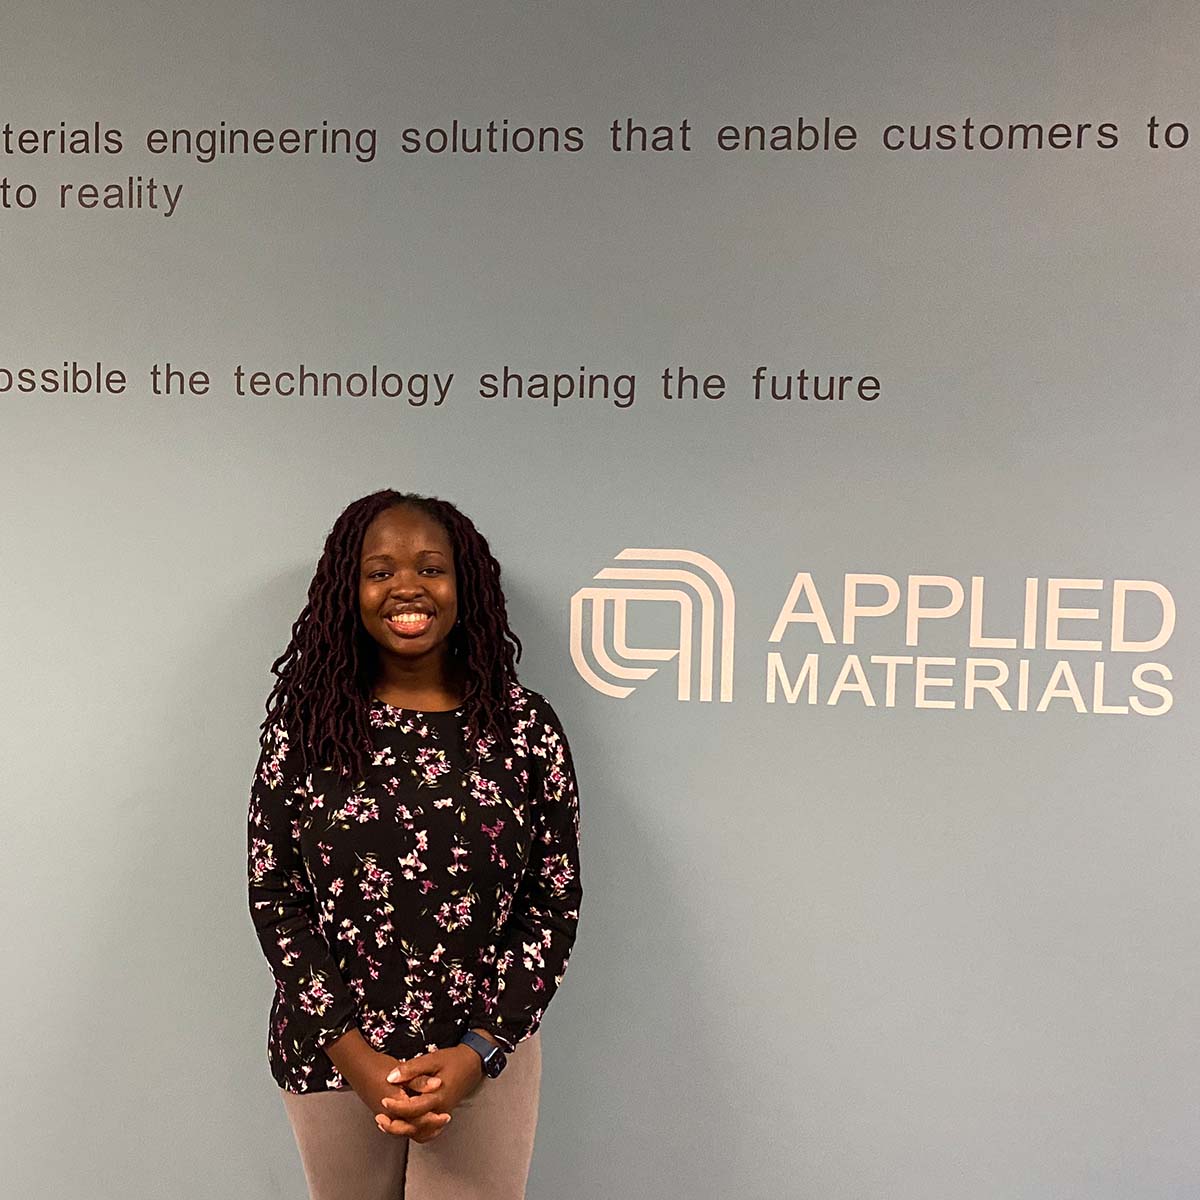 Shalom poses for a photograph in front of the Applied Materials backdrop.